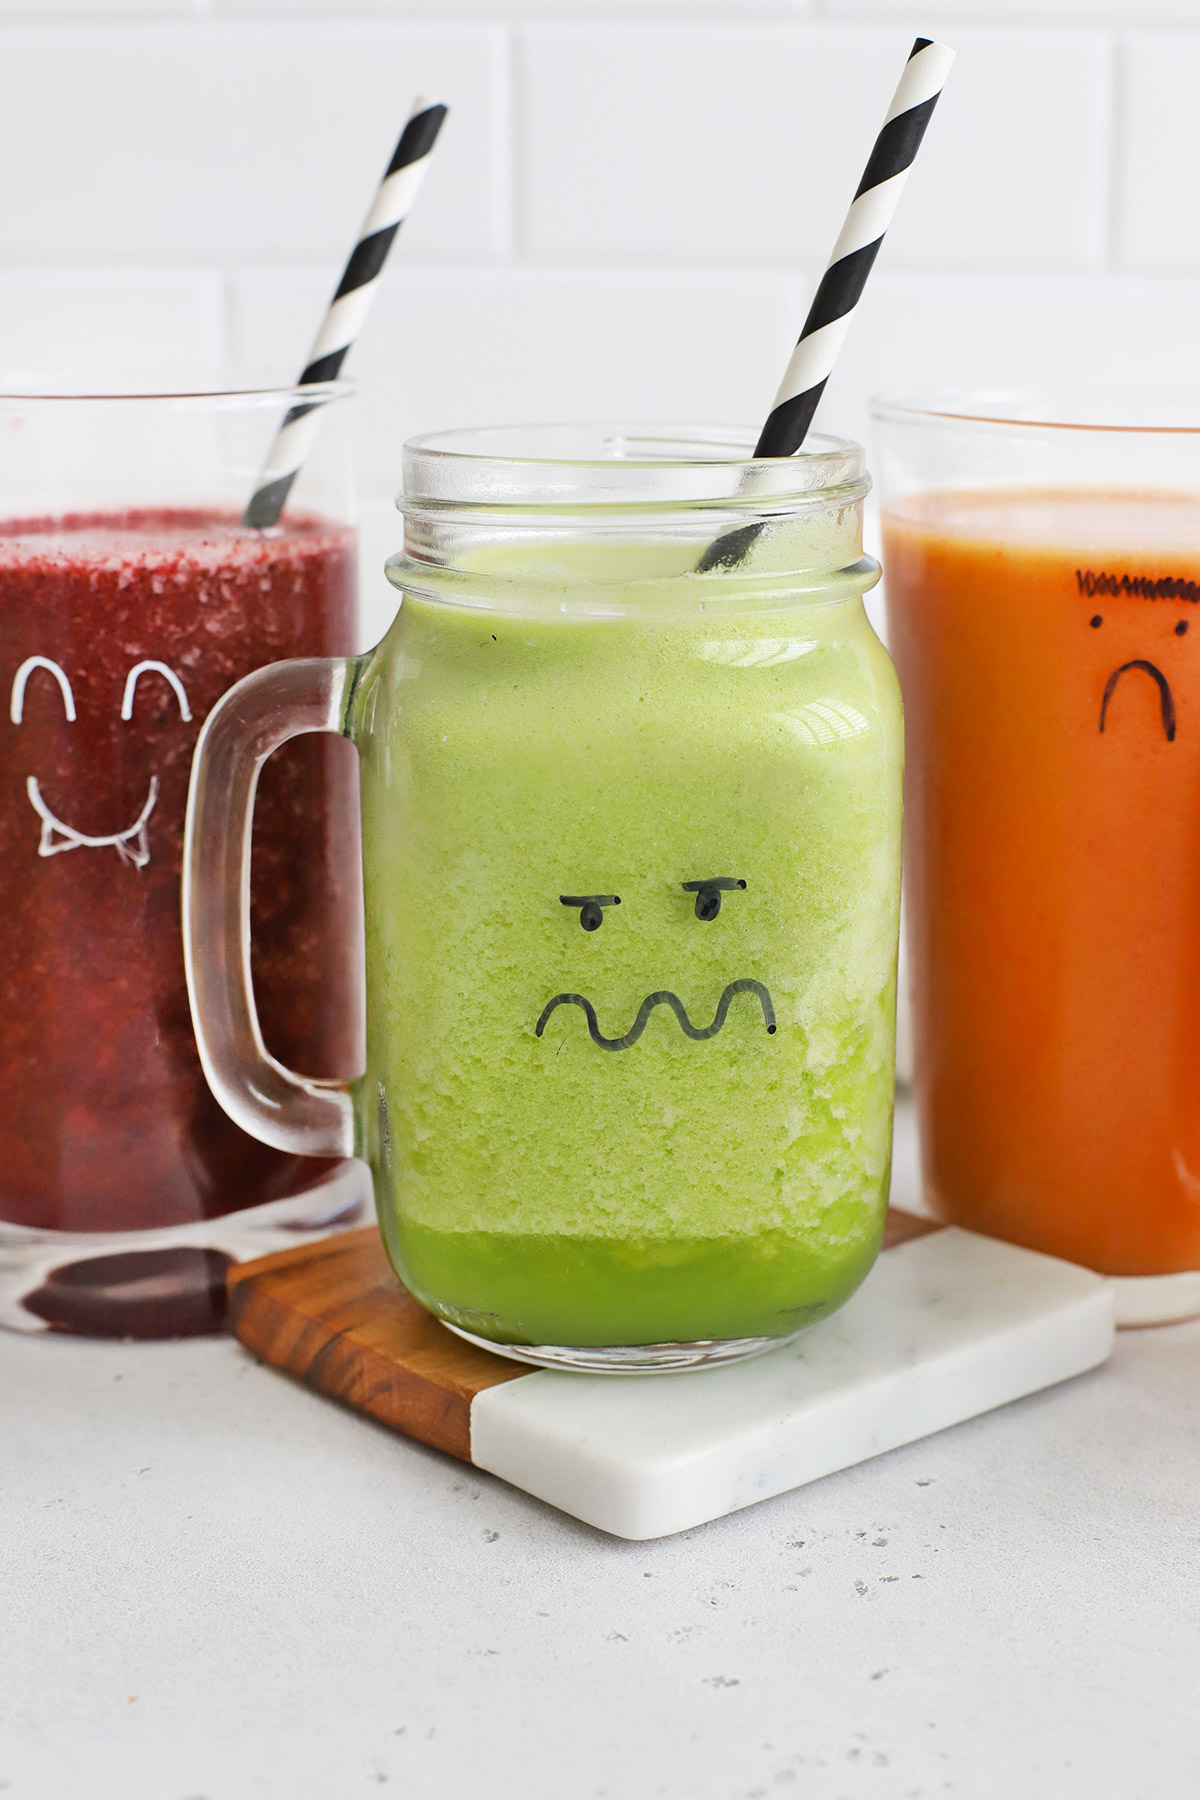 Purple, Green, and Orange Smoothies in glasses with monster faces drawn on them